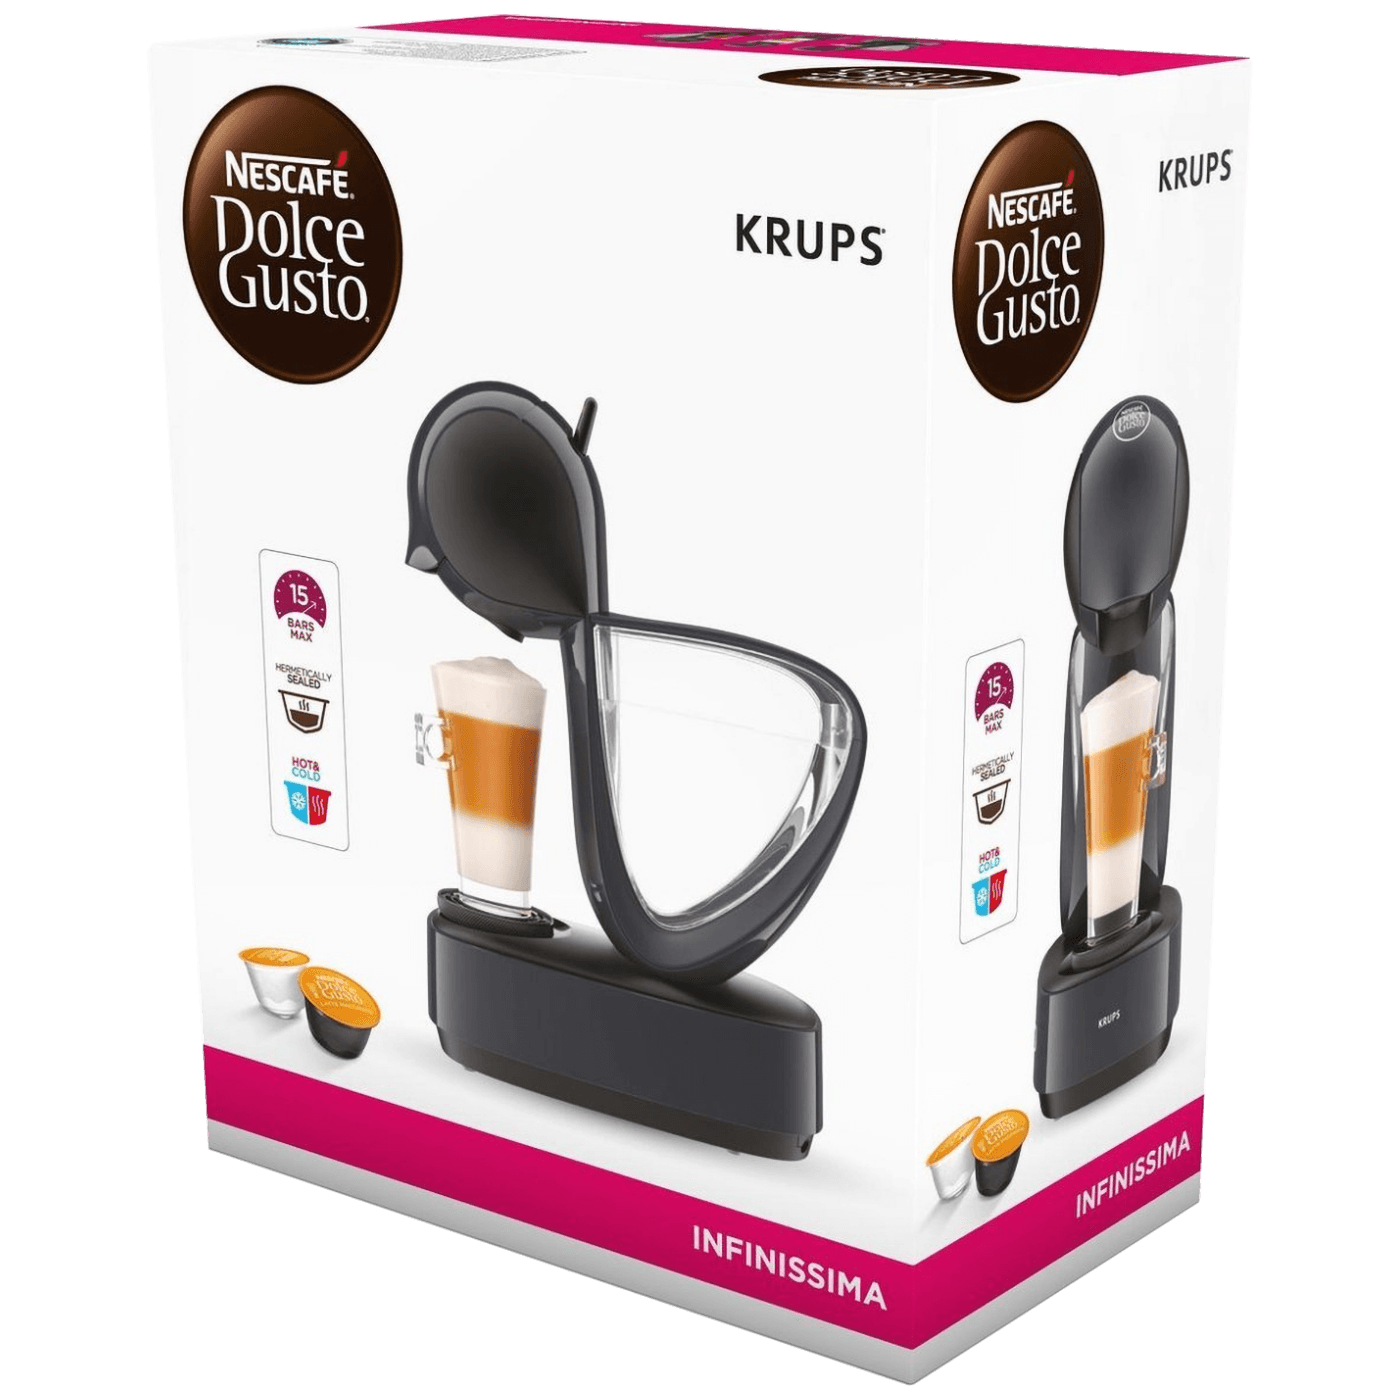 Dolce gusto krups infinissima. Капсульная кофемашина Dolce gusto Krups Infinissima. Кофемашина капсульного типа Dolce gusto Krups Infinissima kp173b10. Капсульная кофемашина Krups Infinissima kp173b.. Кофеварка капсульная Krups Nescafe Dolce gusto Infinissima kp173b10.